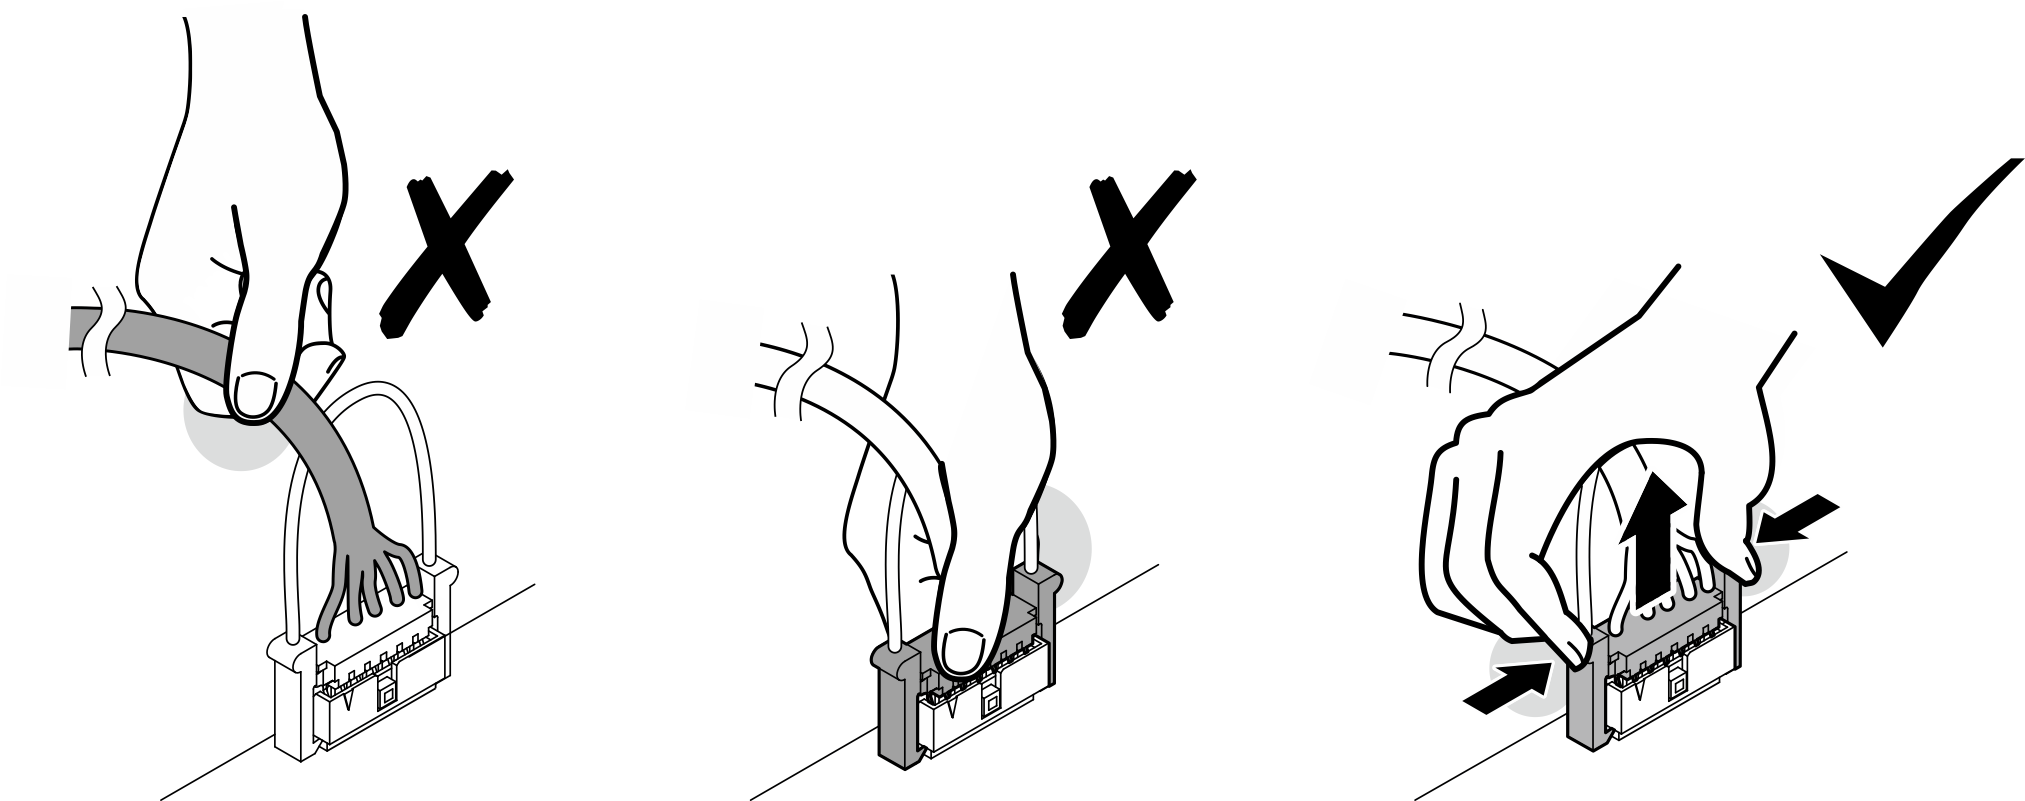 Squeeze the release tabs at both sides and disengage the connector from the cable socket. Do not pull the connector straight up using force.